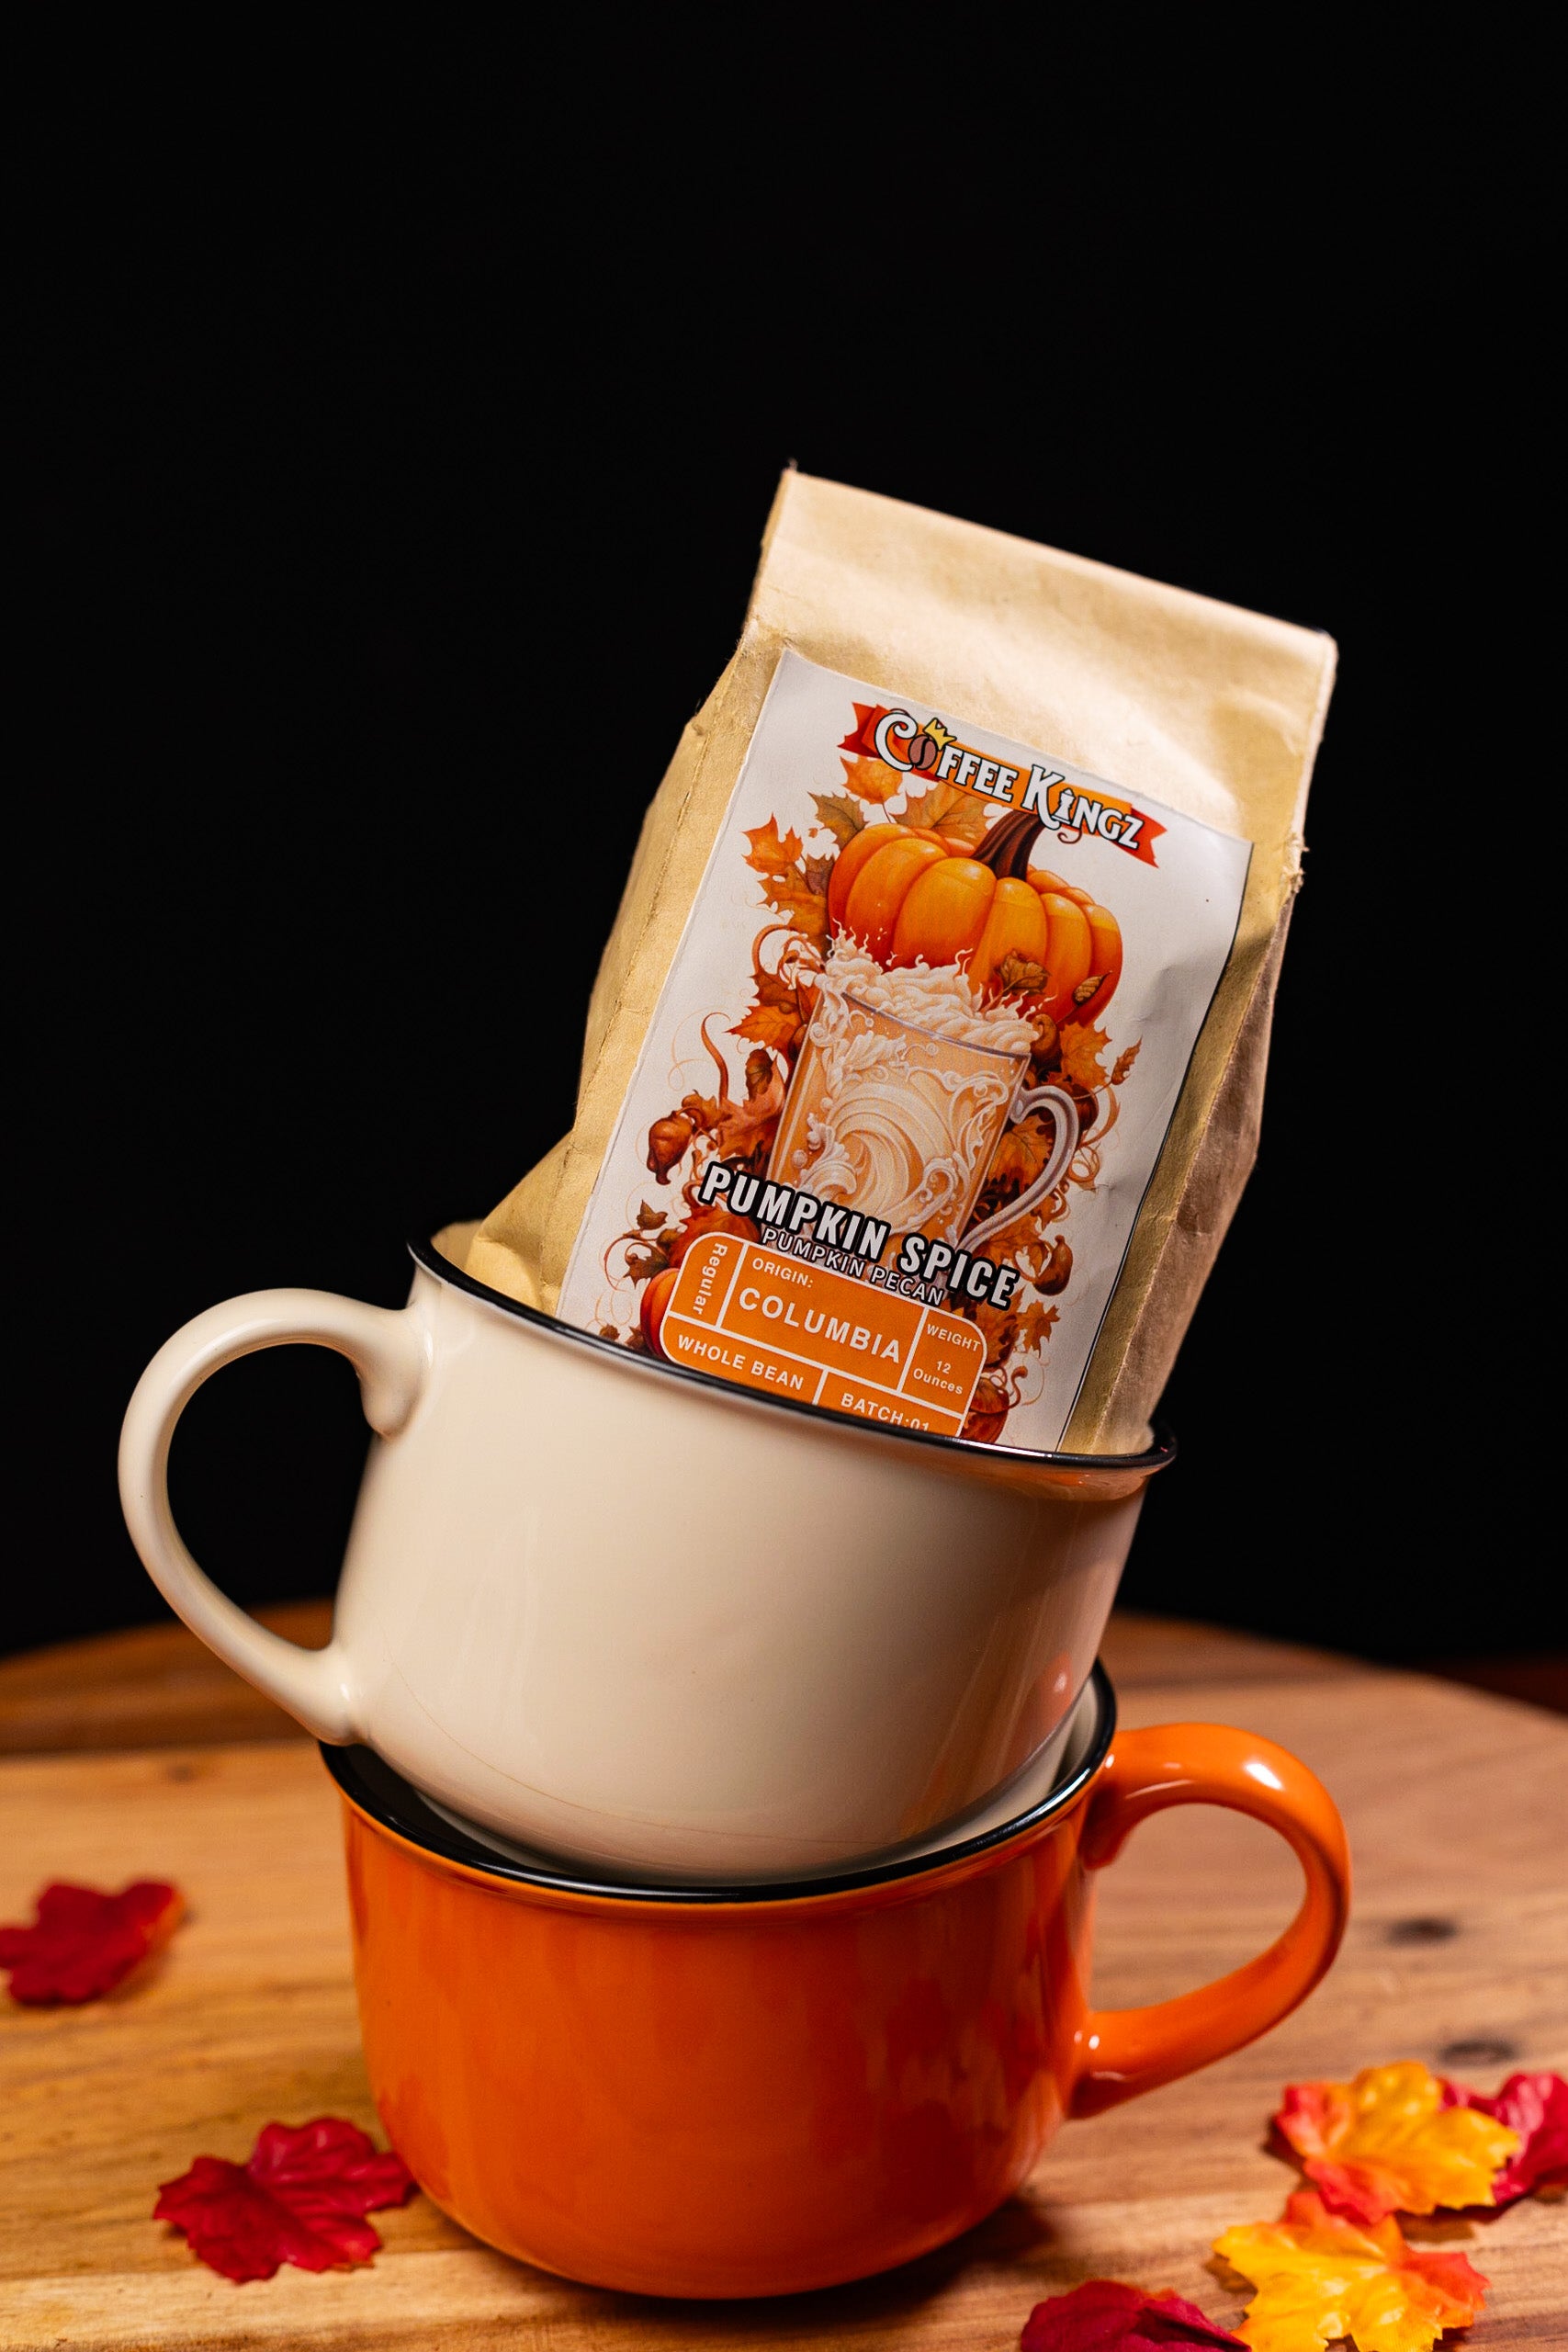 A bag of pumpkin spice flavored coffee kingz coffee beans perched on top of a stack of two coffee cups, with a warm, autumnal backdrop and scattered leaves.